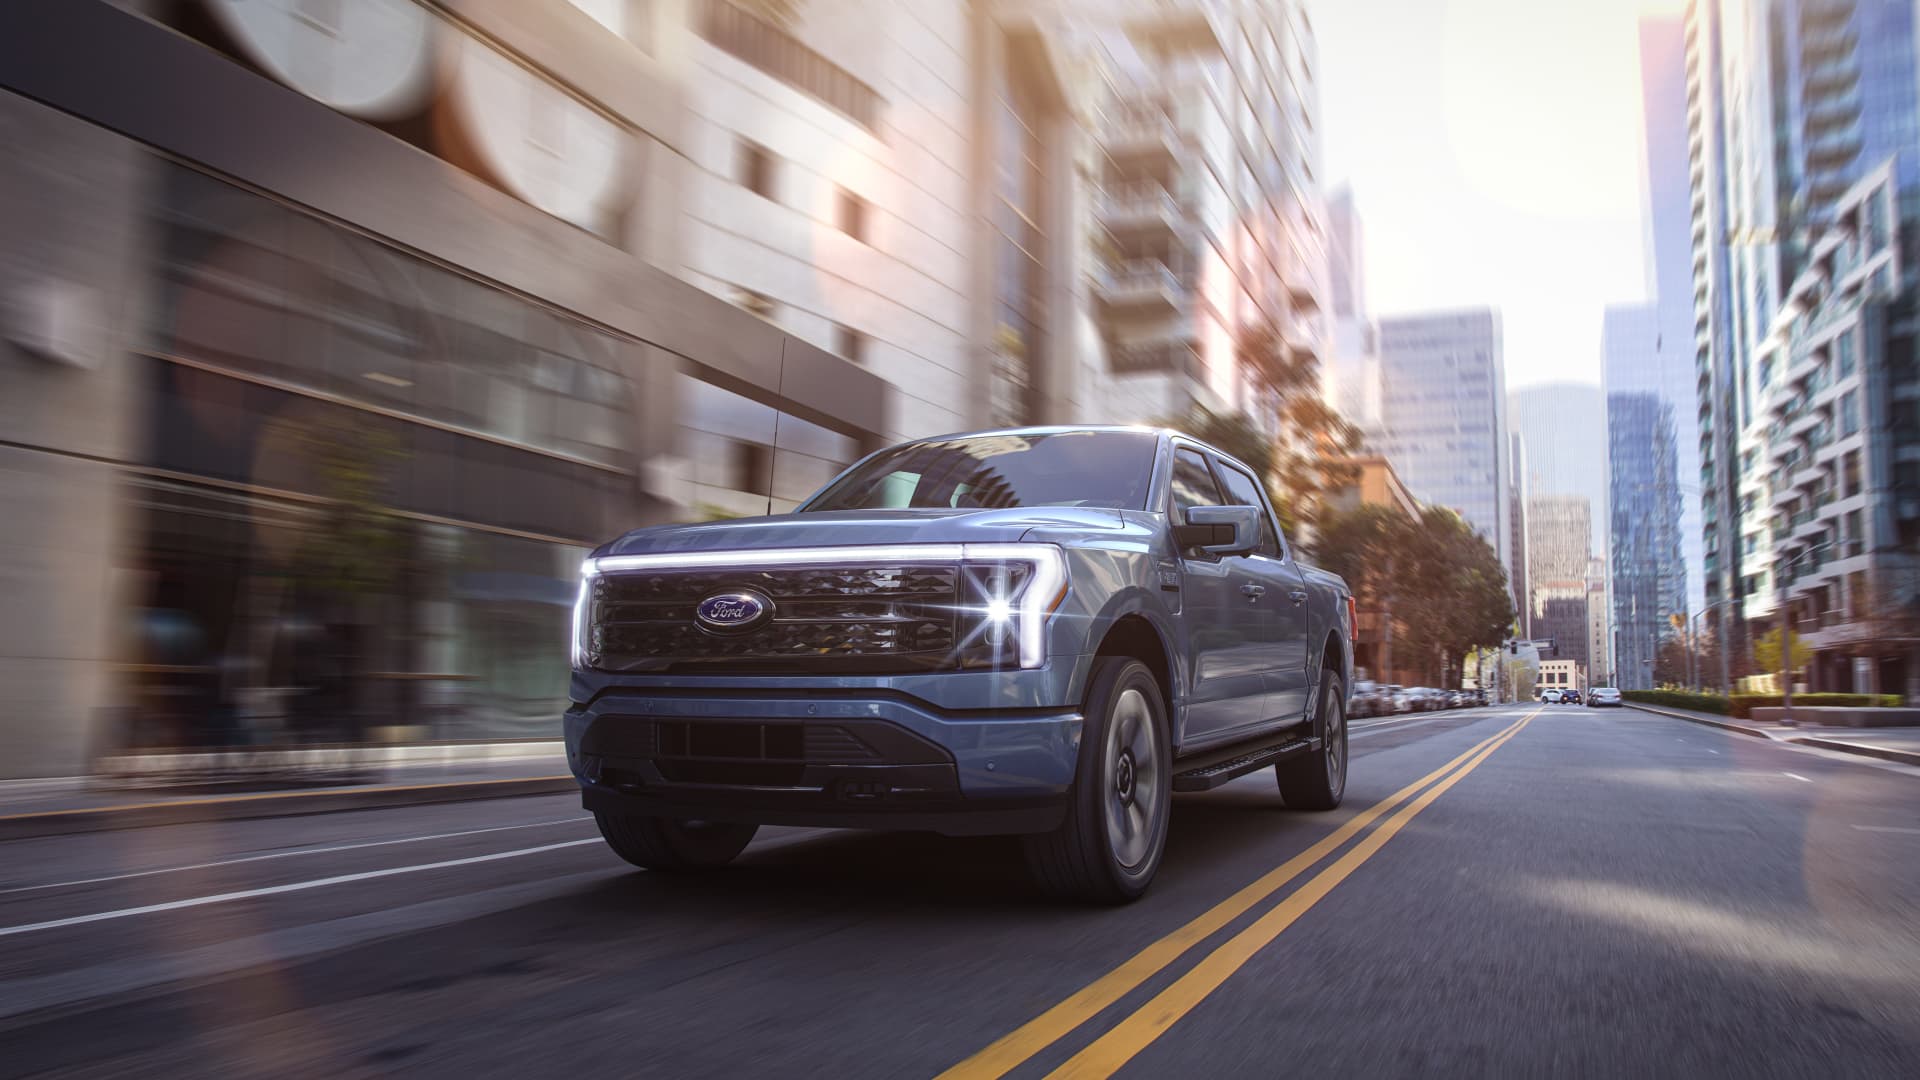 Electric Ford F-150 Lightning named MotorTrend's truck of the year